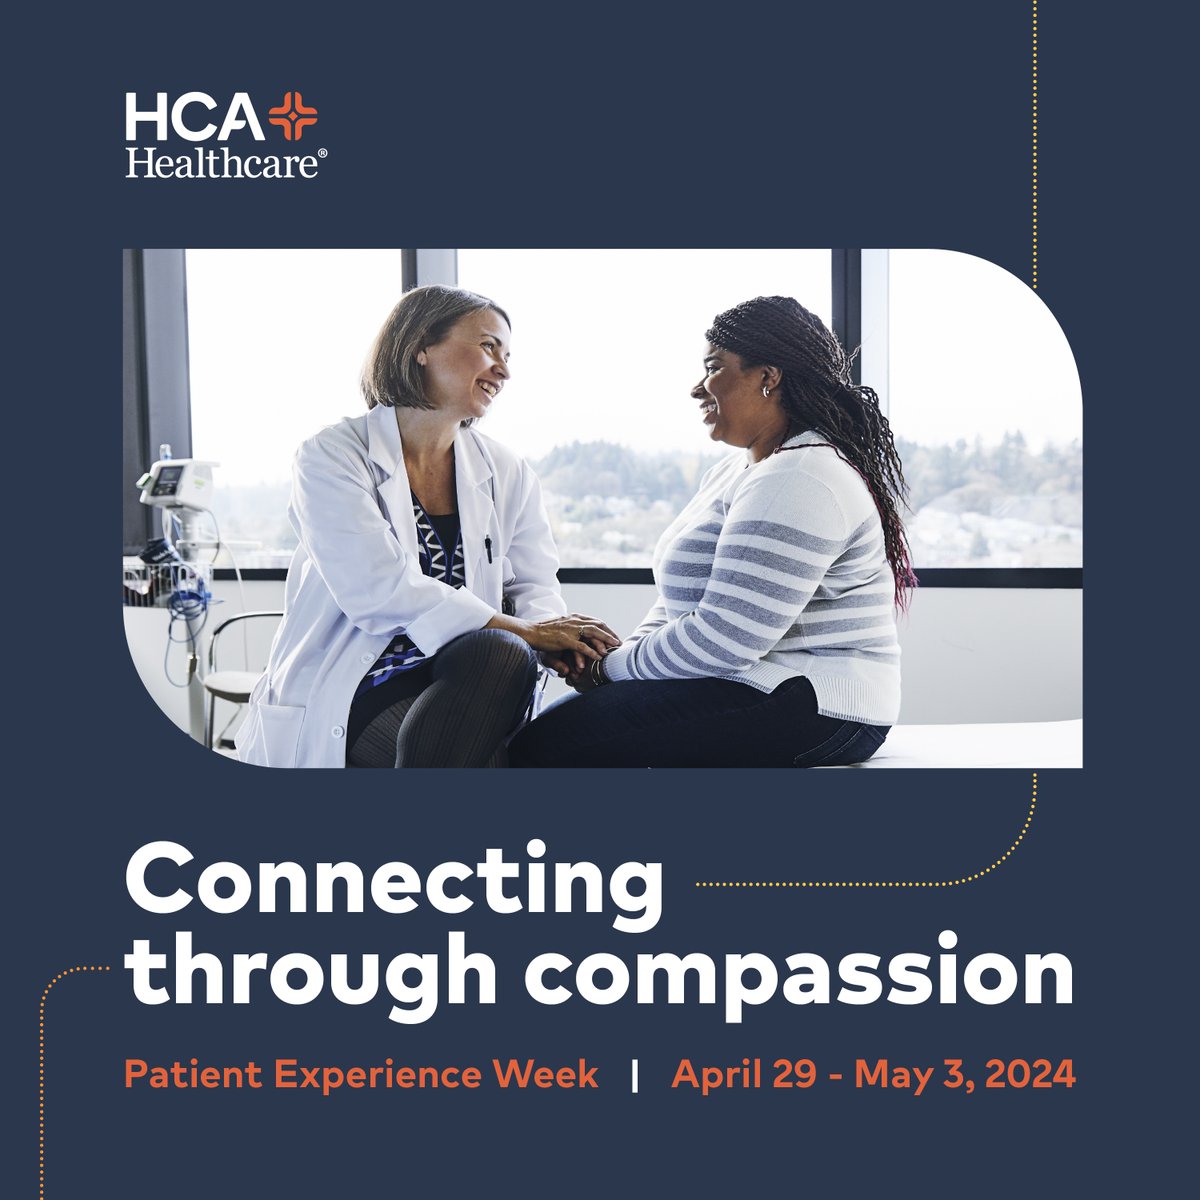 At @HCAHealthcare, we’re committed to caring for the individuals we serve with warmth and empathy. During #PXWeek, HealthONE forges strong connections to ensure every patient receives the compassionate care they deserve.